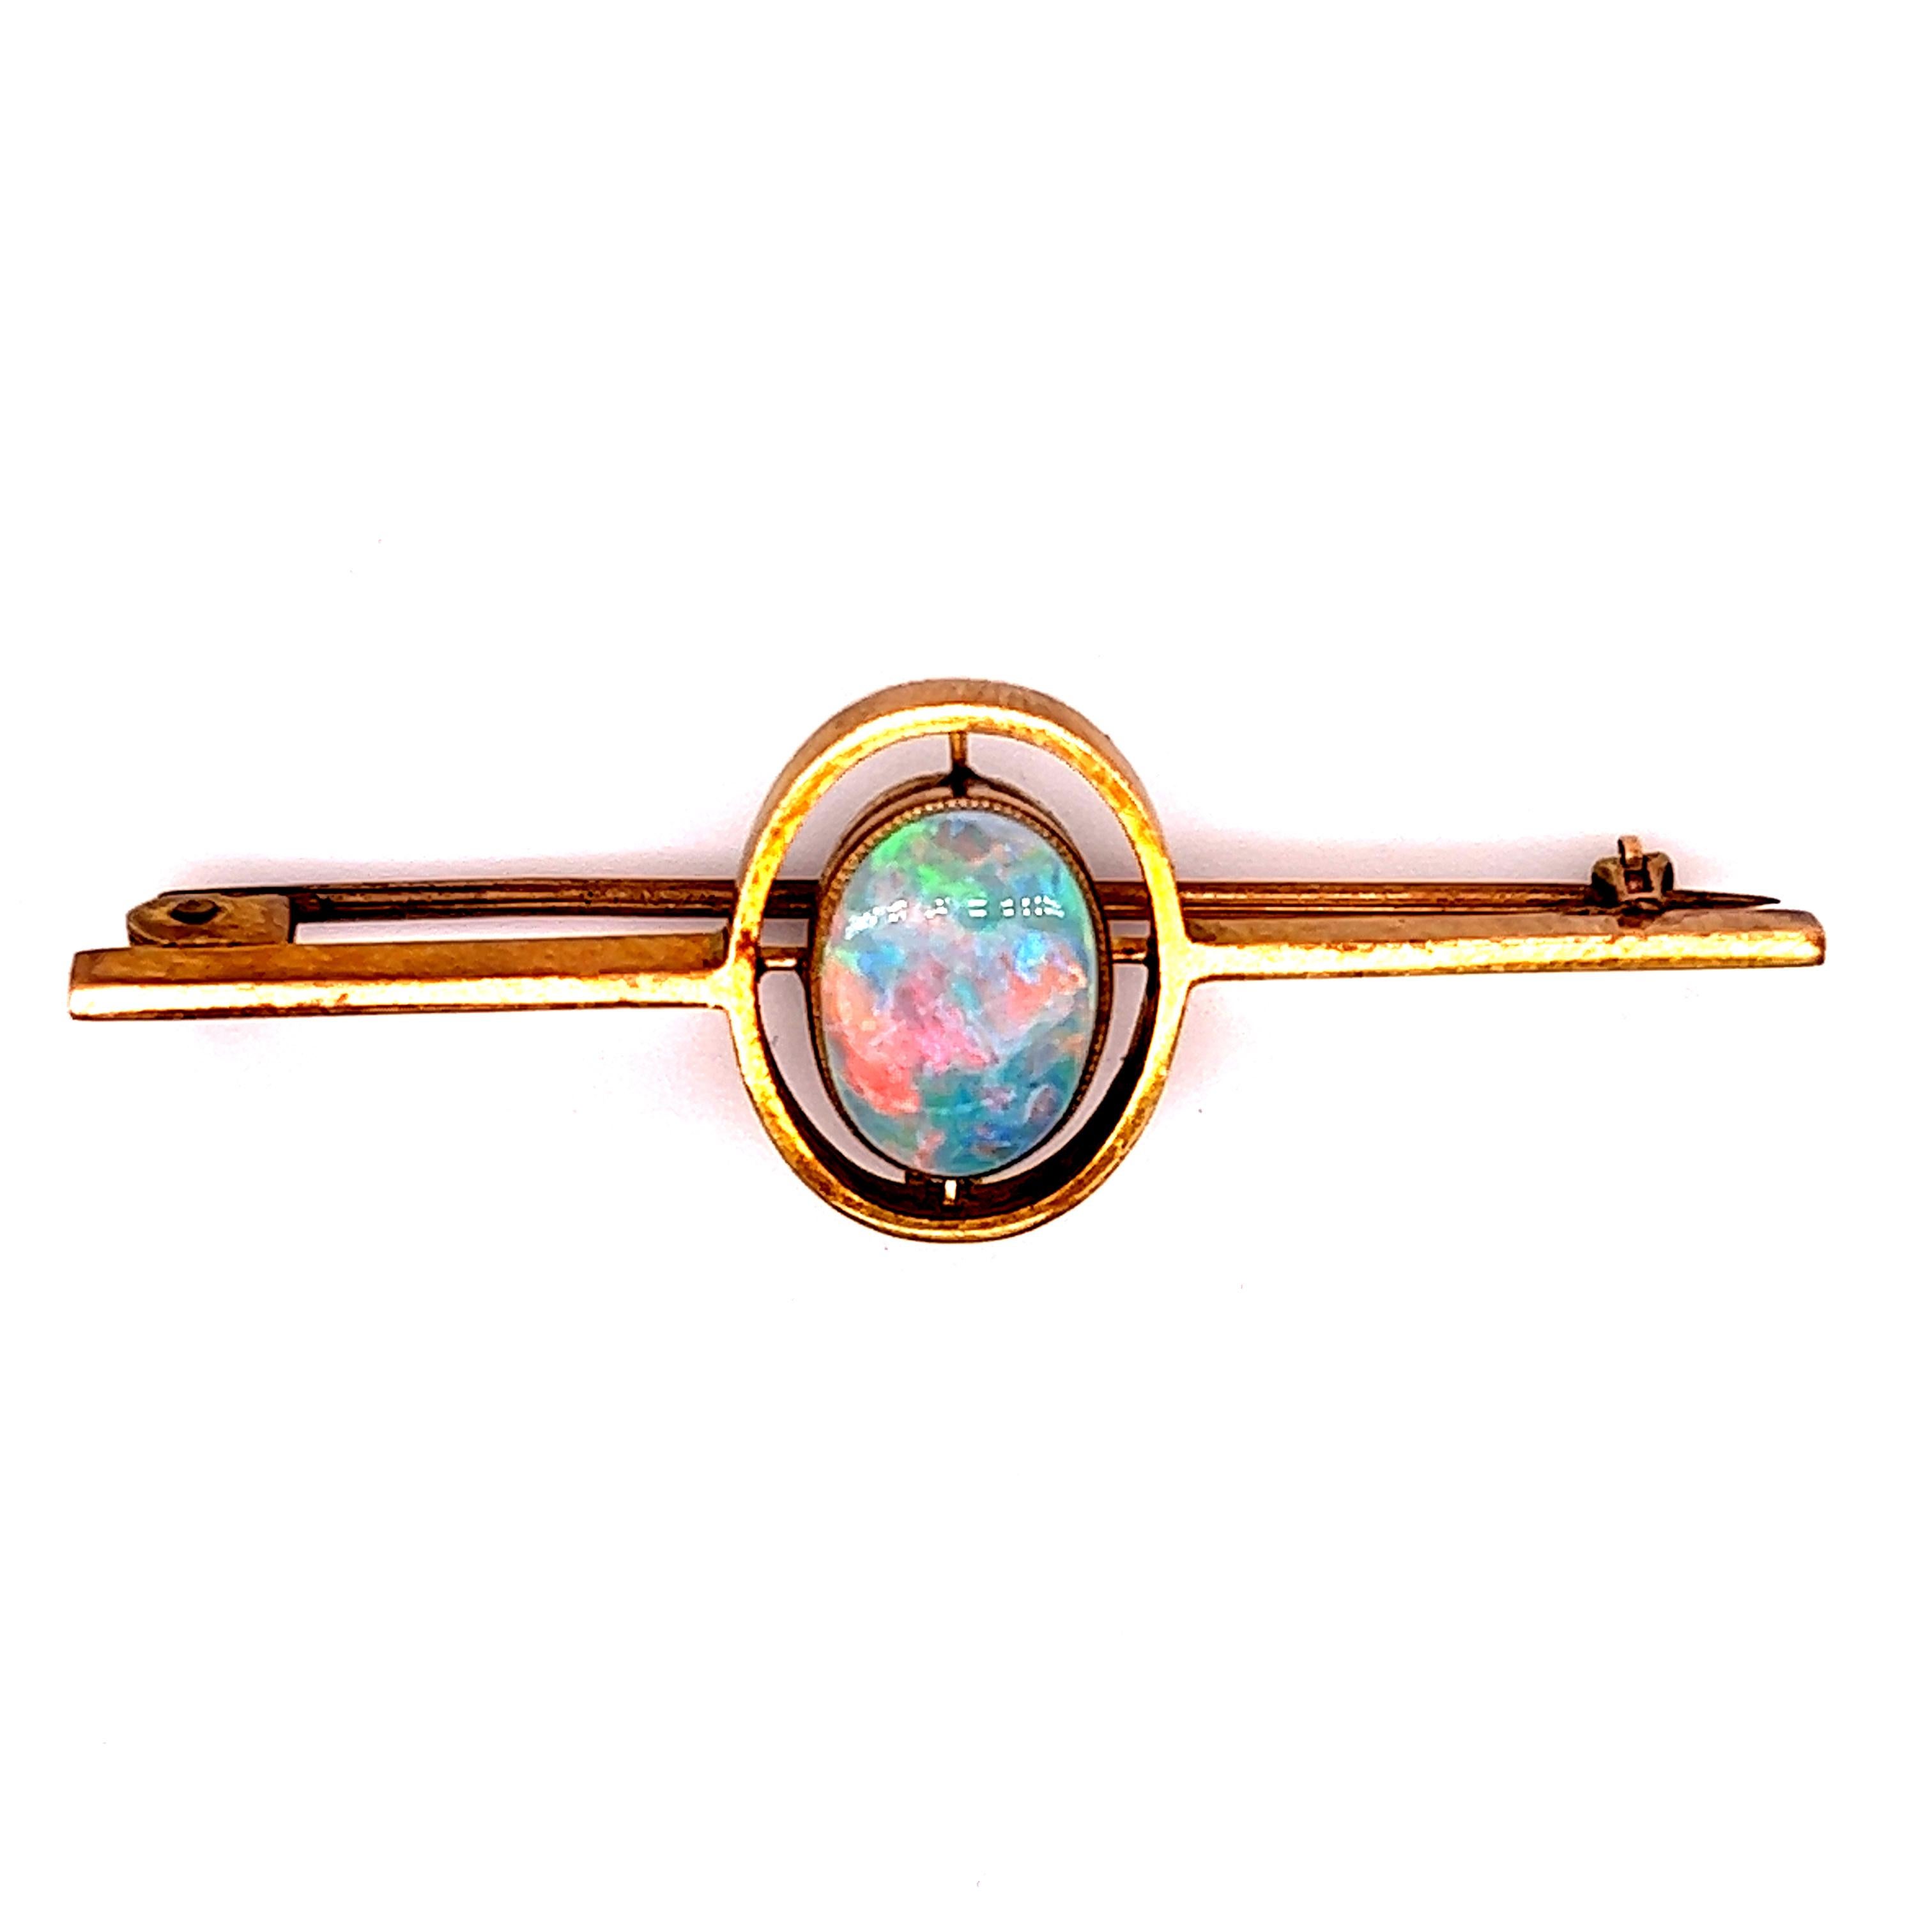 Fantastic design seen on this vintage treasure. This design is simple yet elegant. The brooch is crafted in 18k yellow gold and measures 2